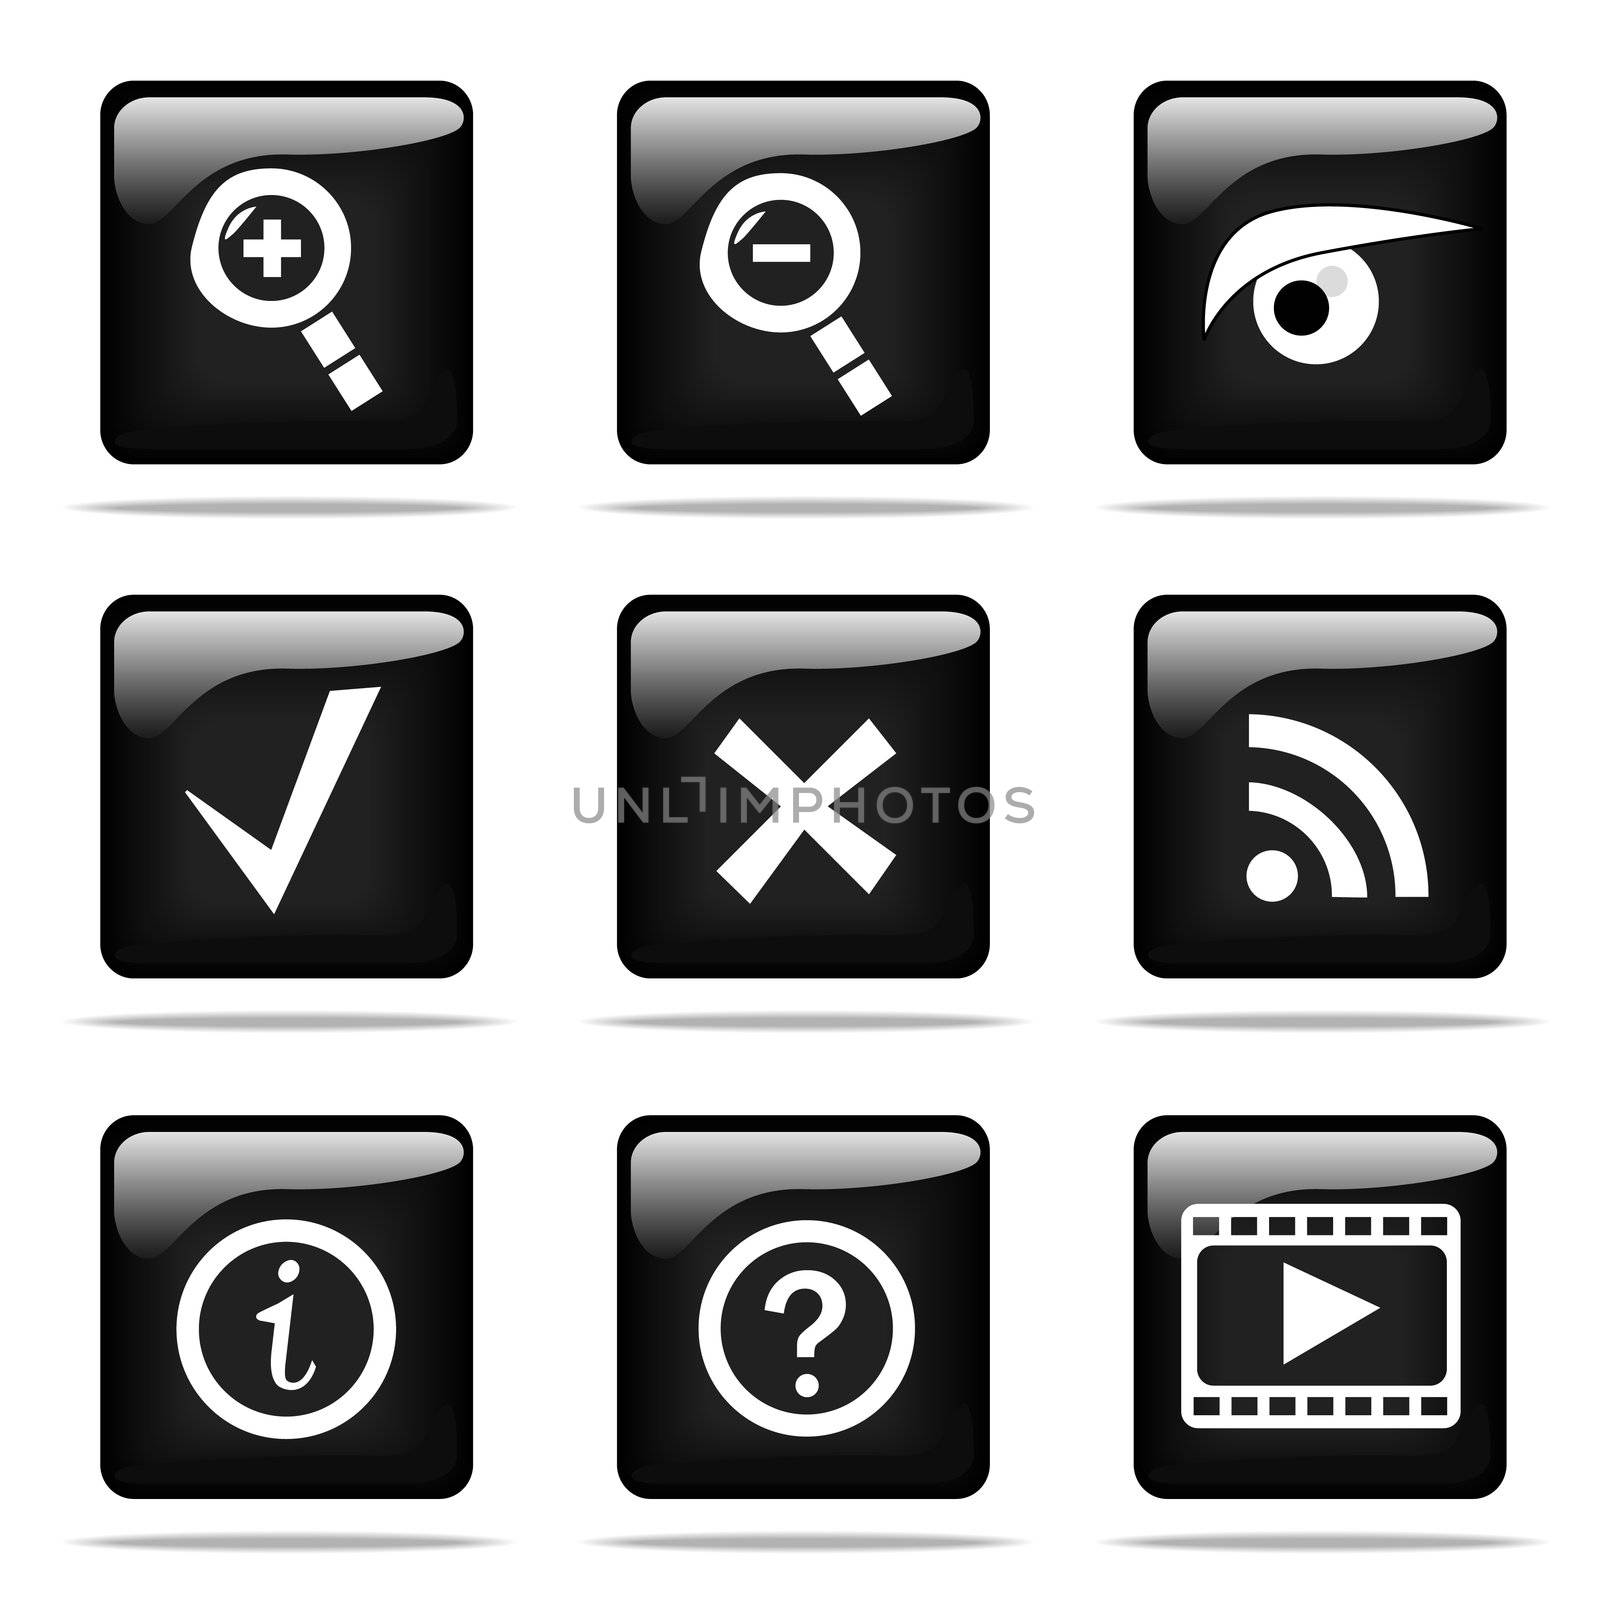 Set of glossy buttons with icons by skvoor